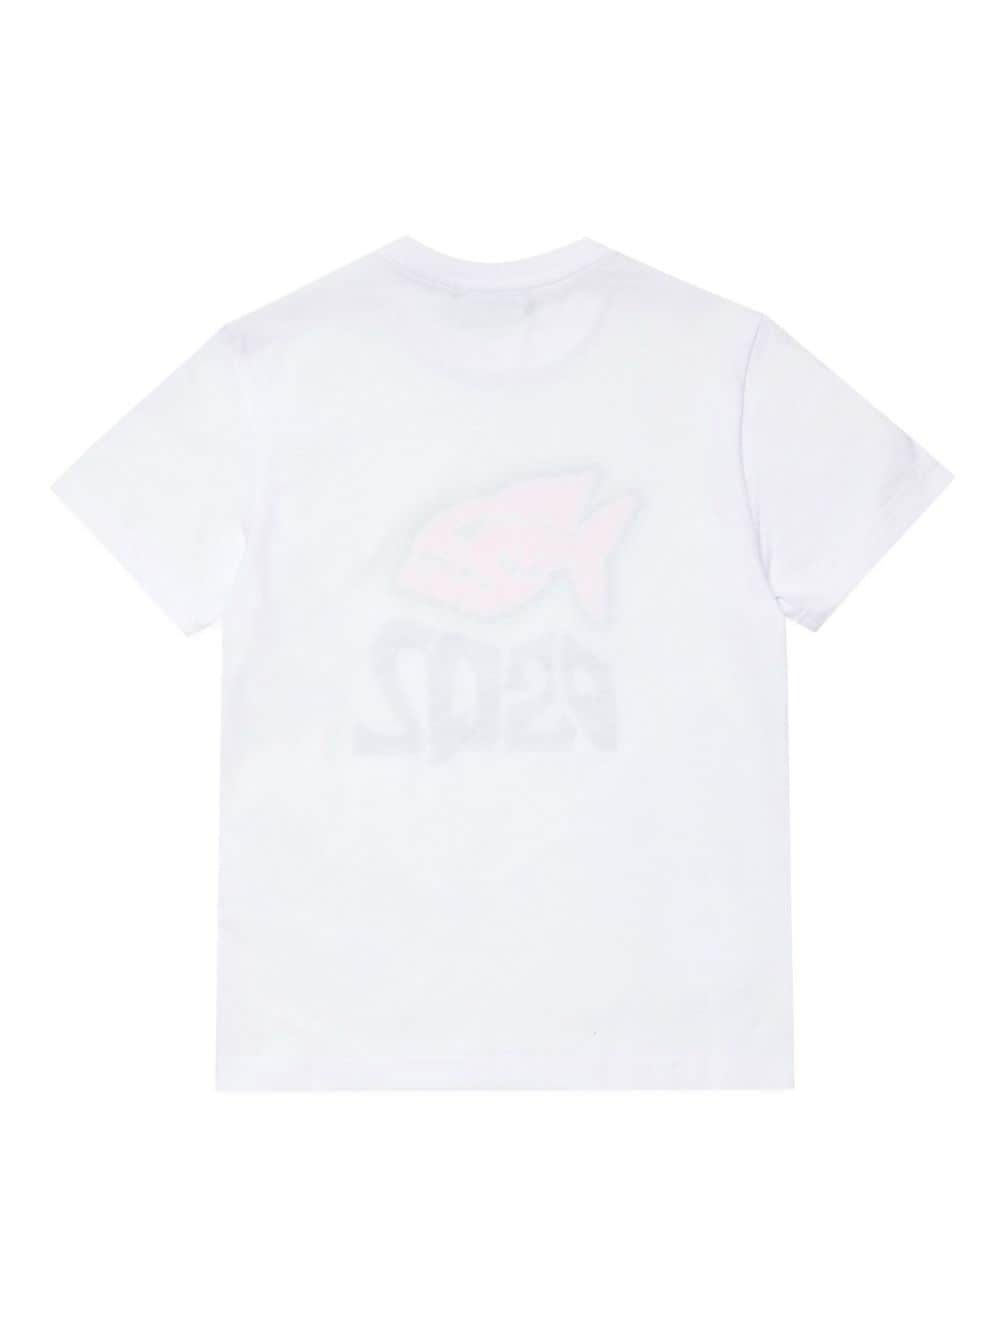 White t-shirt for boys with logo